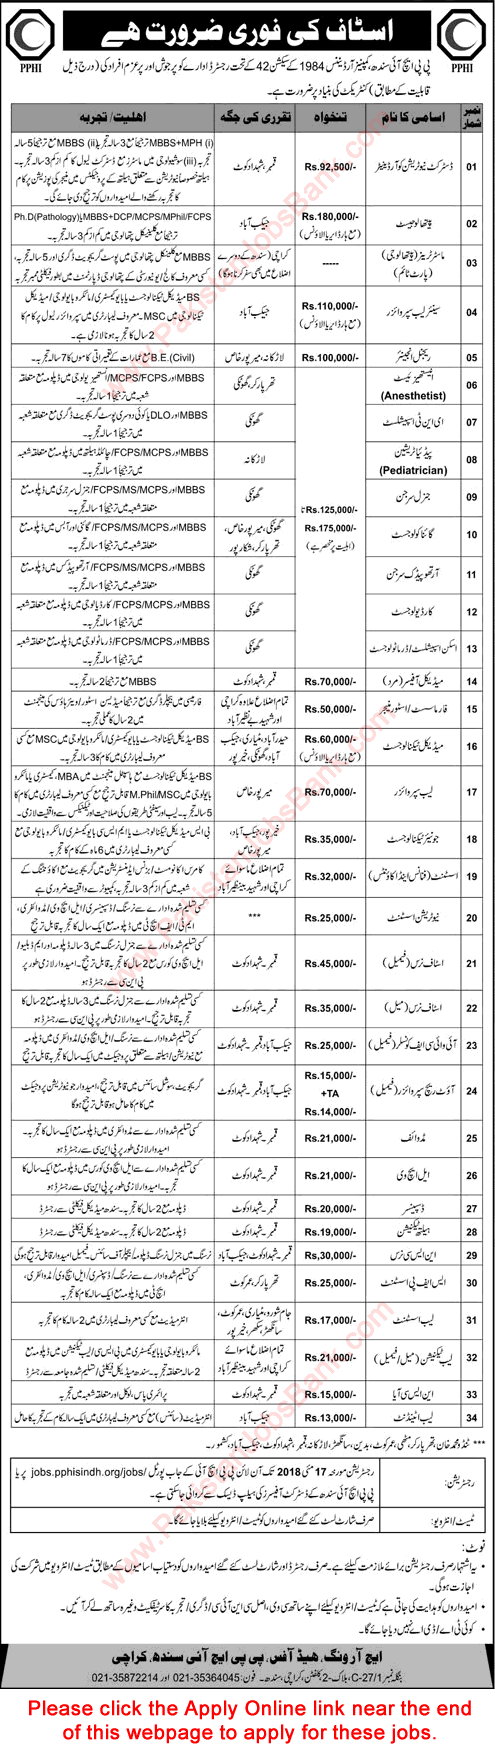 PPHI Sindh Jobs May 2018 Apply Online People's Primary Healthcare Initiative Latest